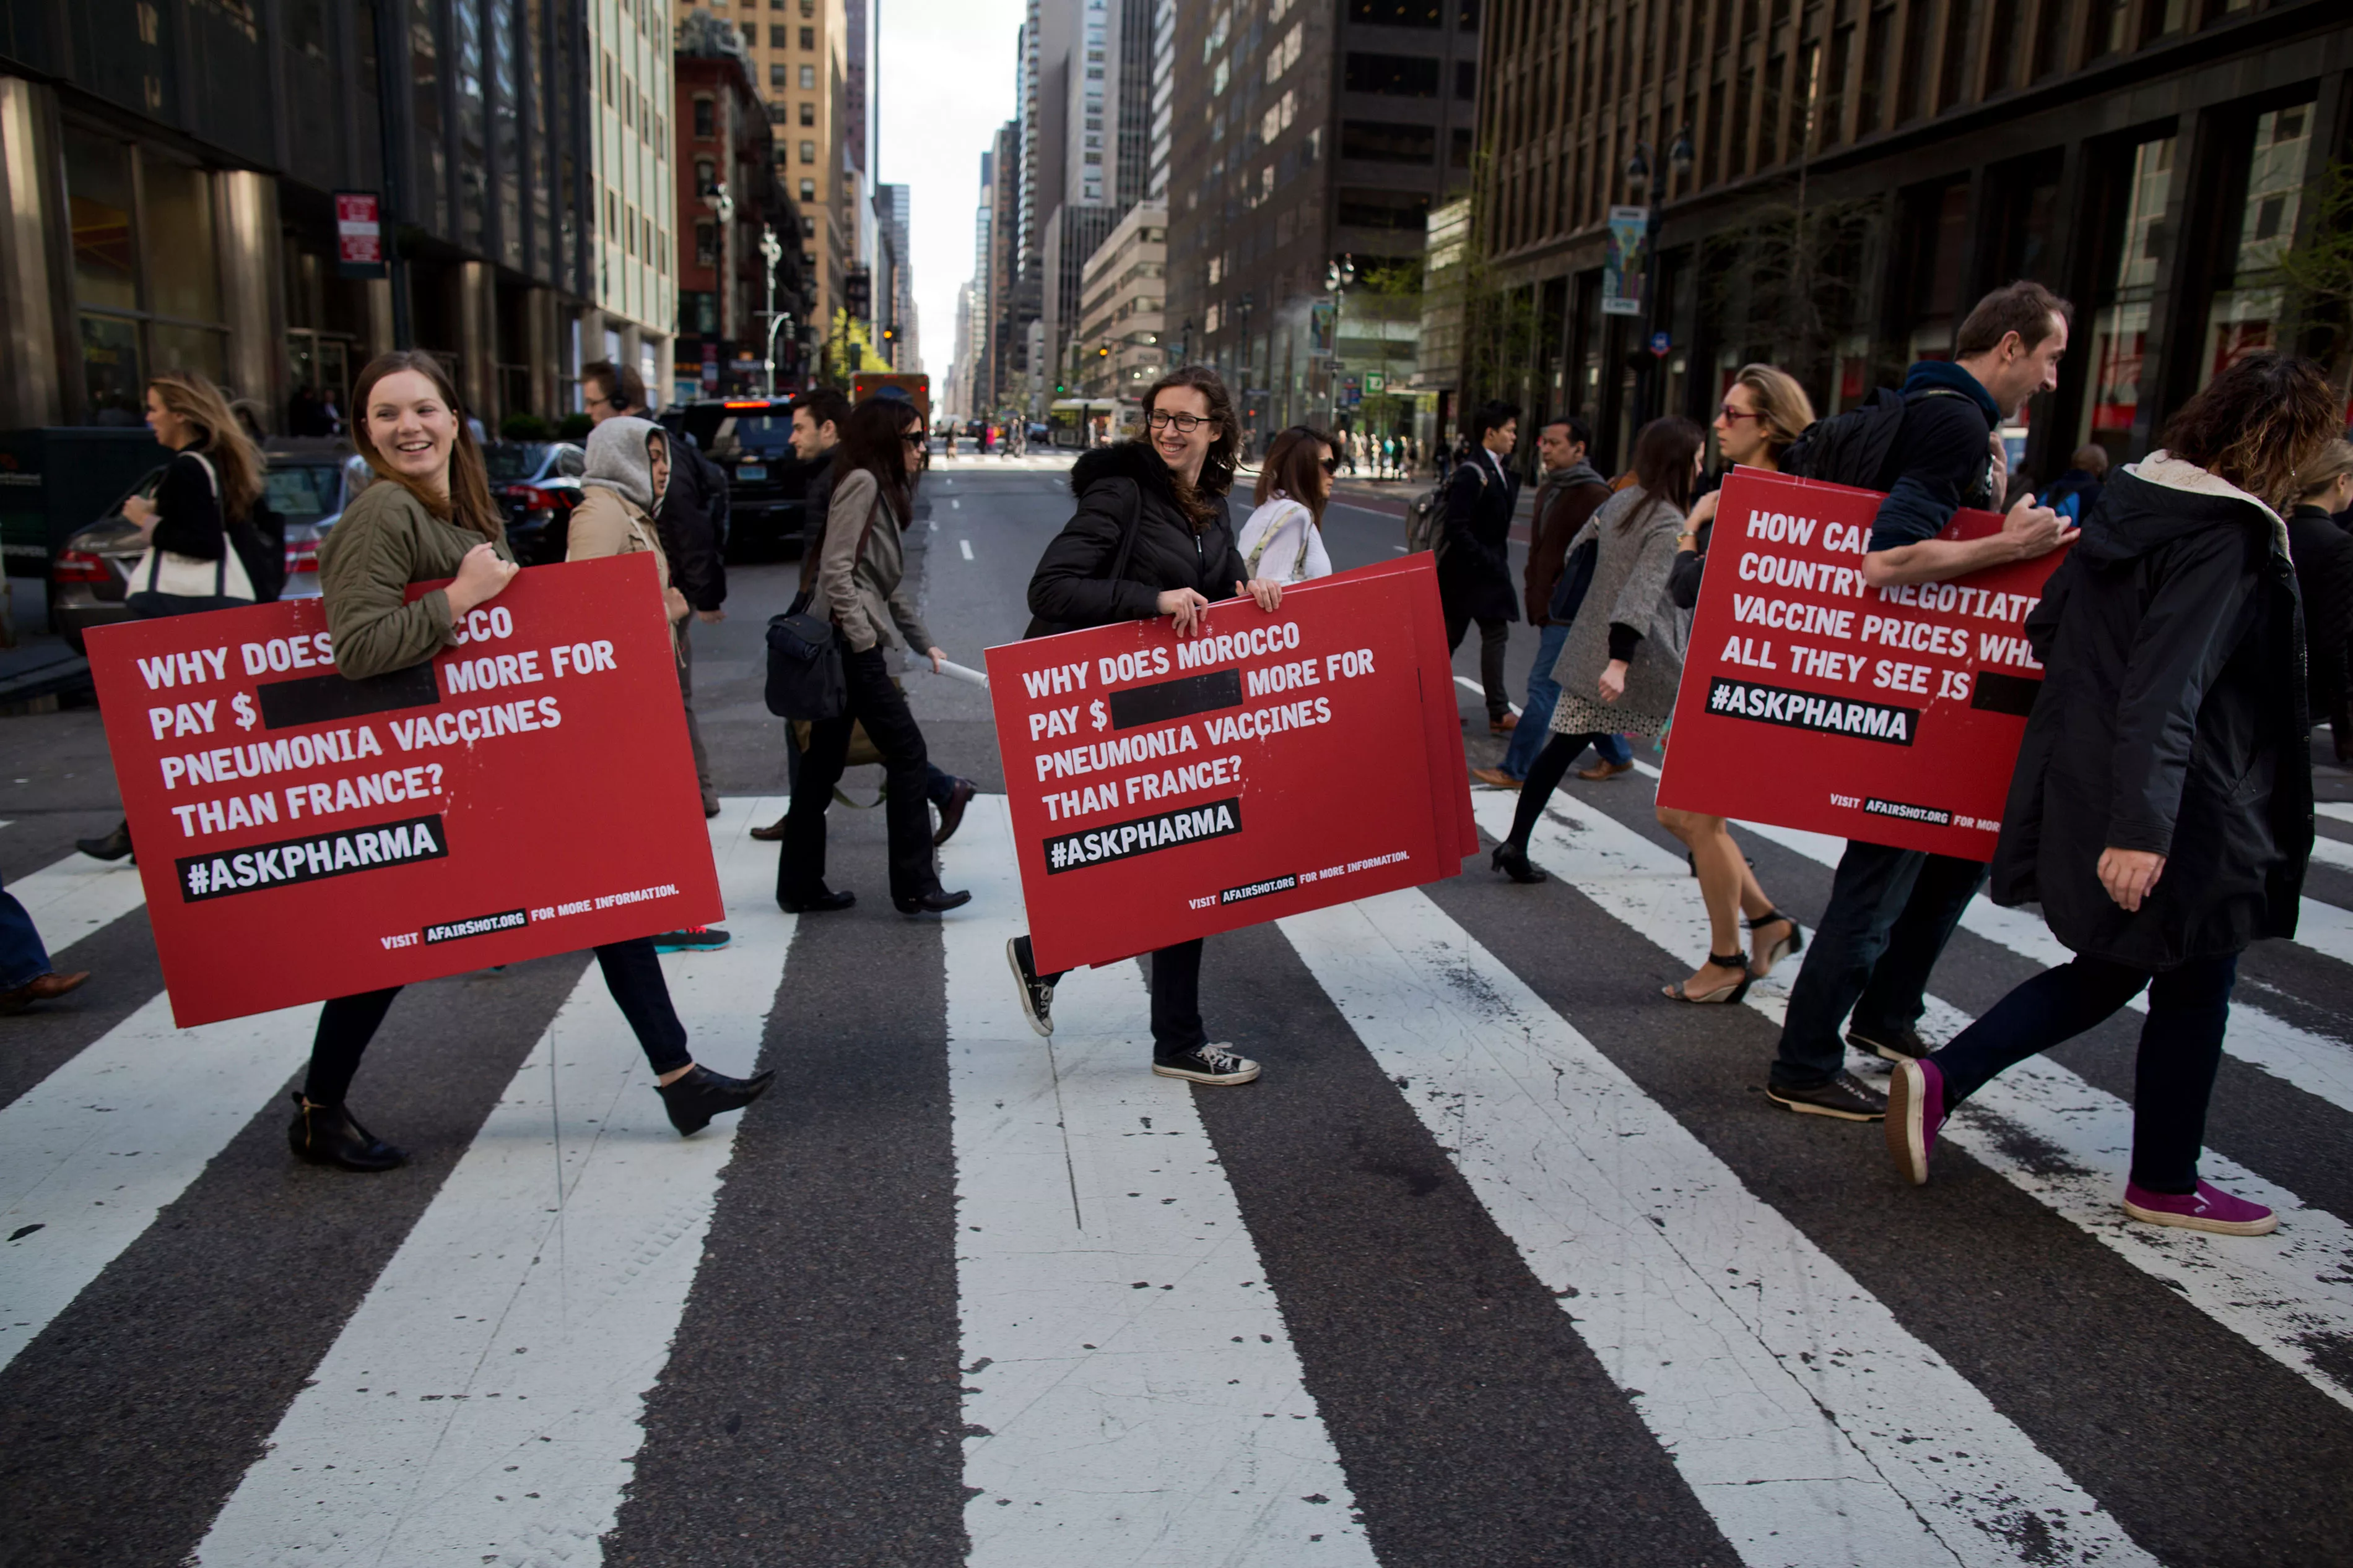 Activists from Doctors Without Borders protest vaccine pricing policies in front of the Pfizer World Headquarters in New York NY, Thursday, April 22, 2015. Pfizer refuses to publish the price of the pnuemococcal vaccine, preventing developing countries from negotiating a fair price for the drug.